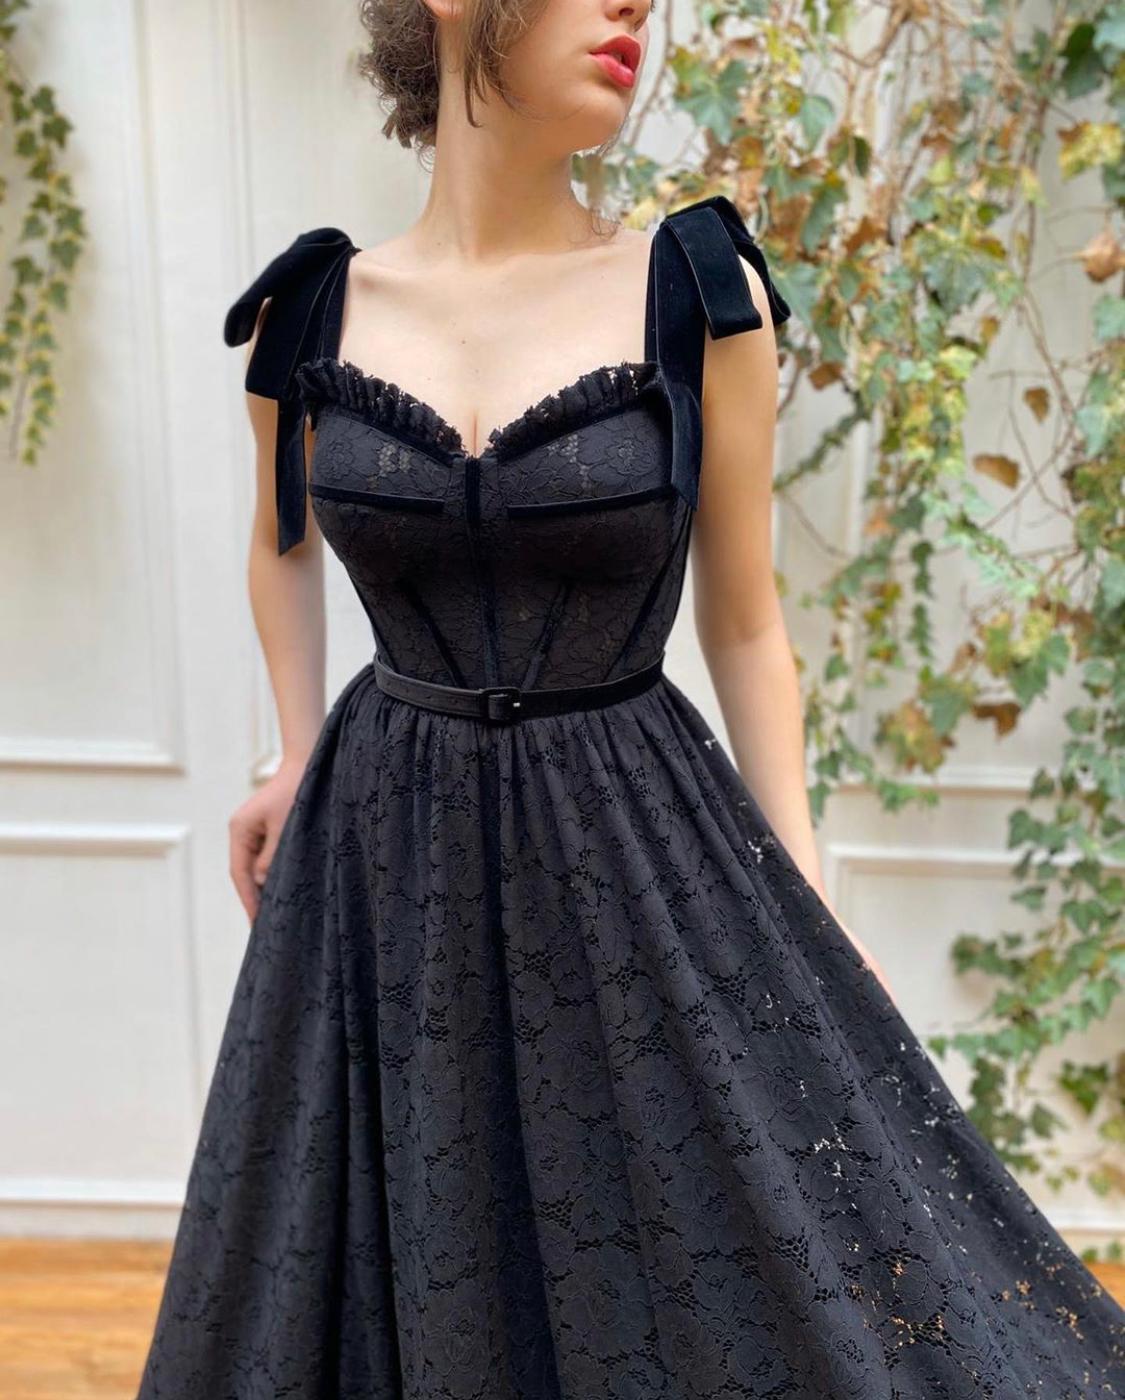 Black A-Line dress with straps and lace